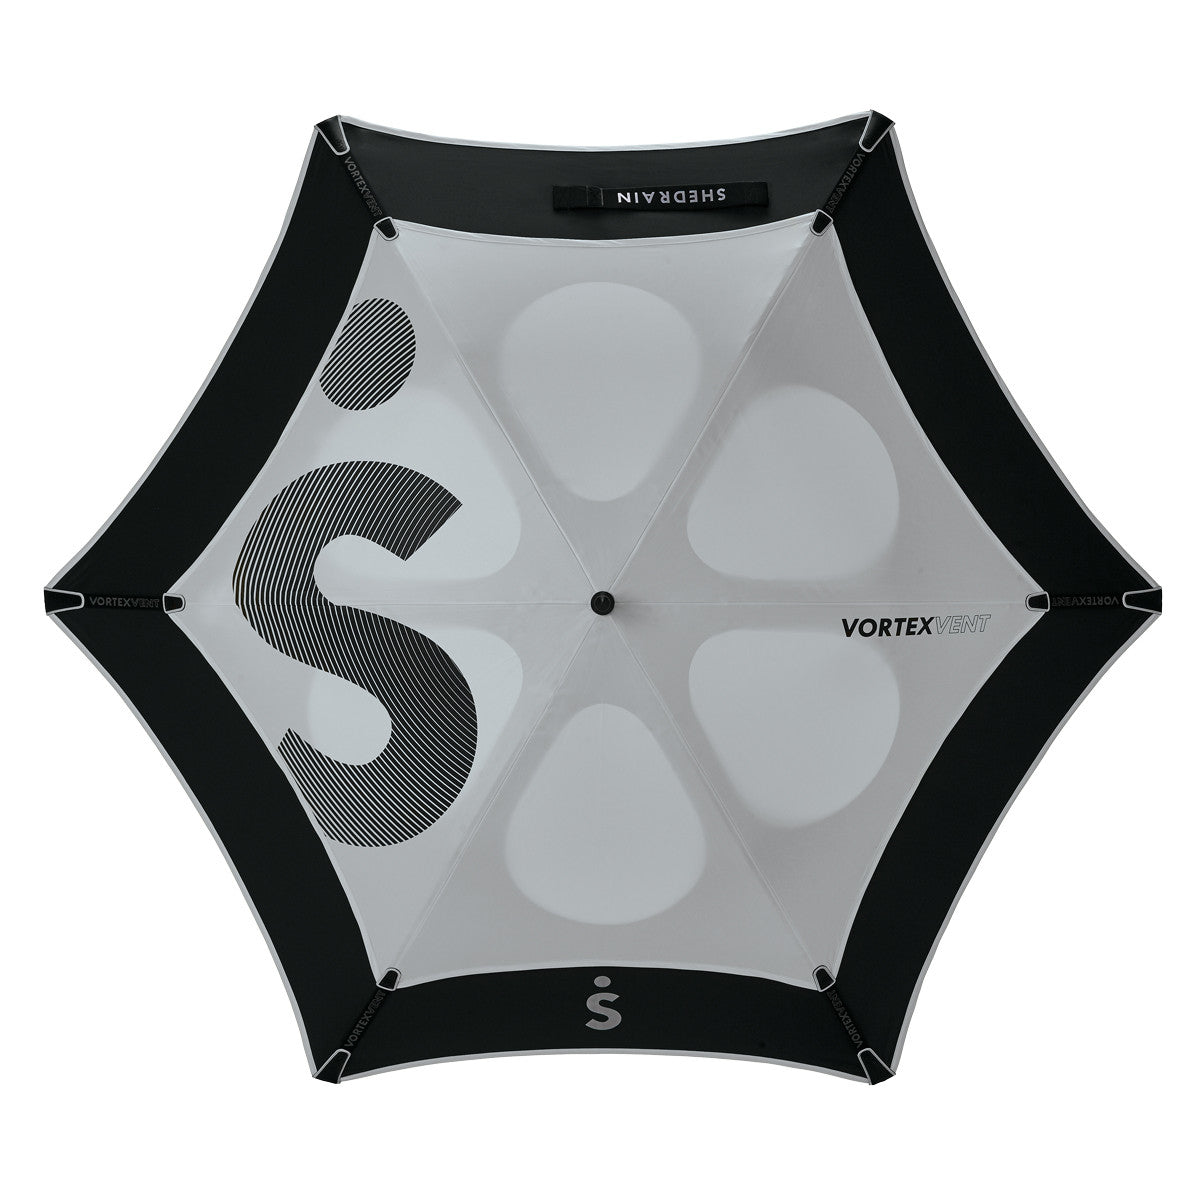 light grey and black vented double canopy wind-resistant three person golf umbrella with fiberglass frame and rubber grip, viewed from above with very large letter S logo